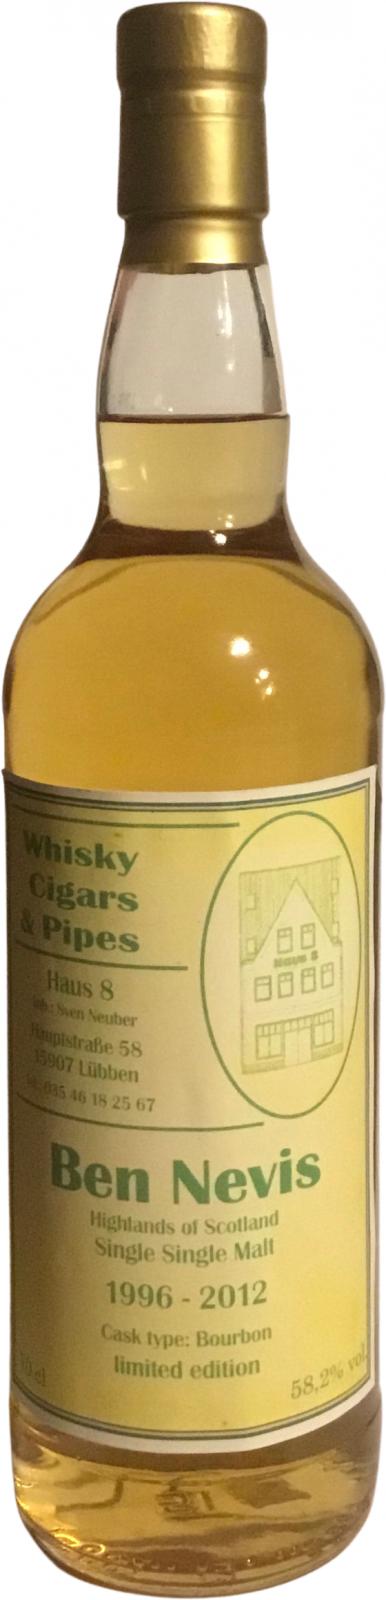 Ben Nevis 1996 UD Whisky Club Lubben Bourbon Whisky Cigars & Pipes 58.2% 700ml